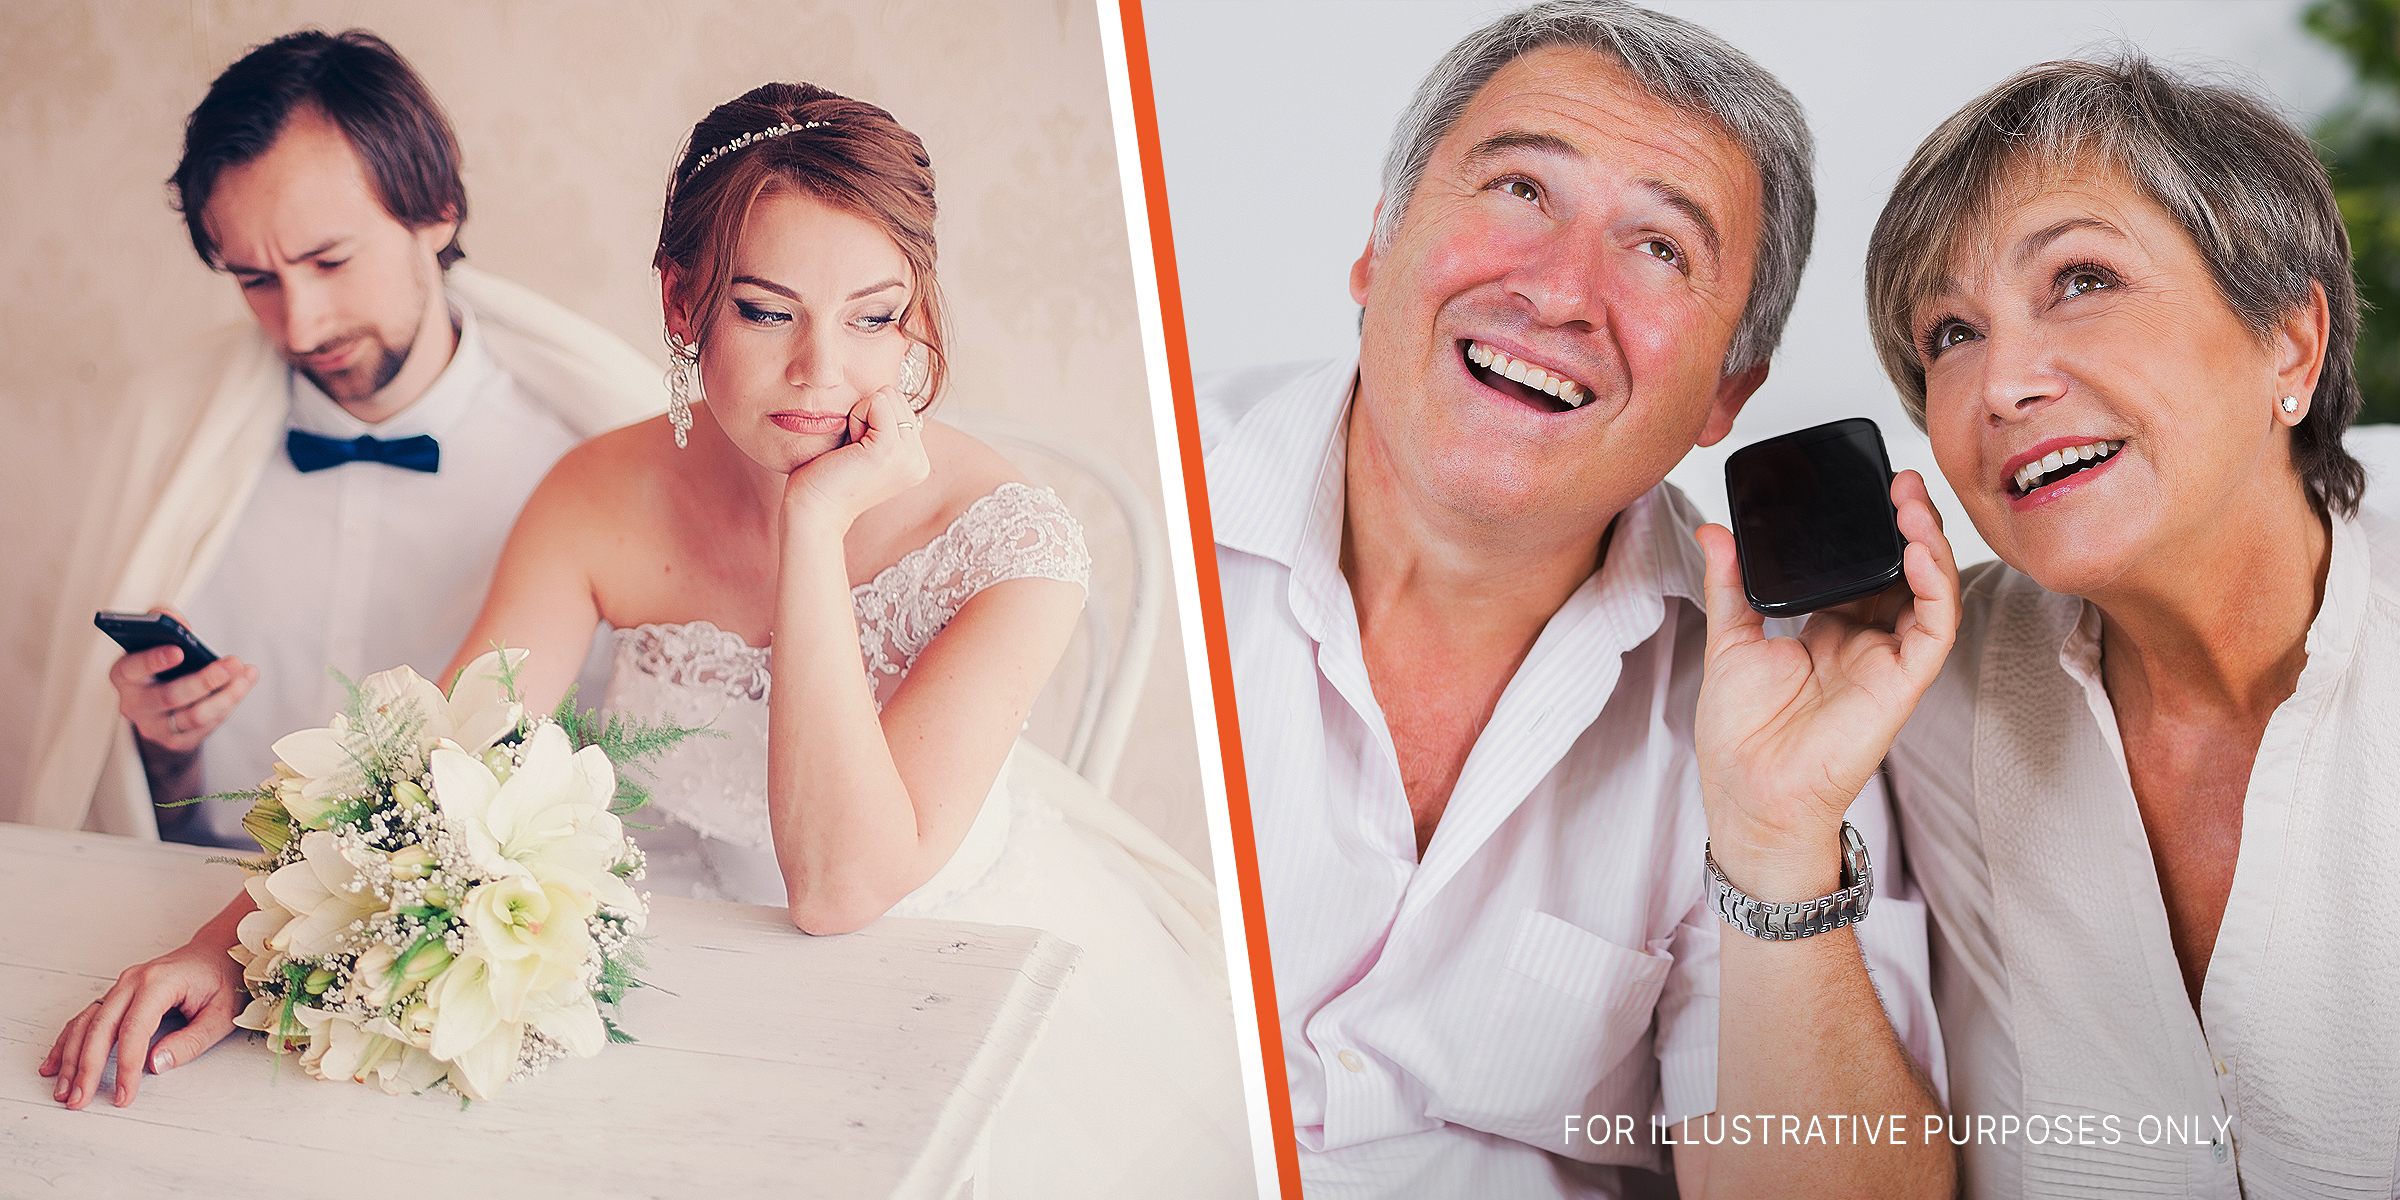 A groom looking up set while looking at his phone, as his bride looks disappointed | An older company smiling while leaving a voice message | Source: Shutterstock